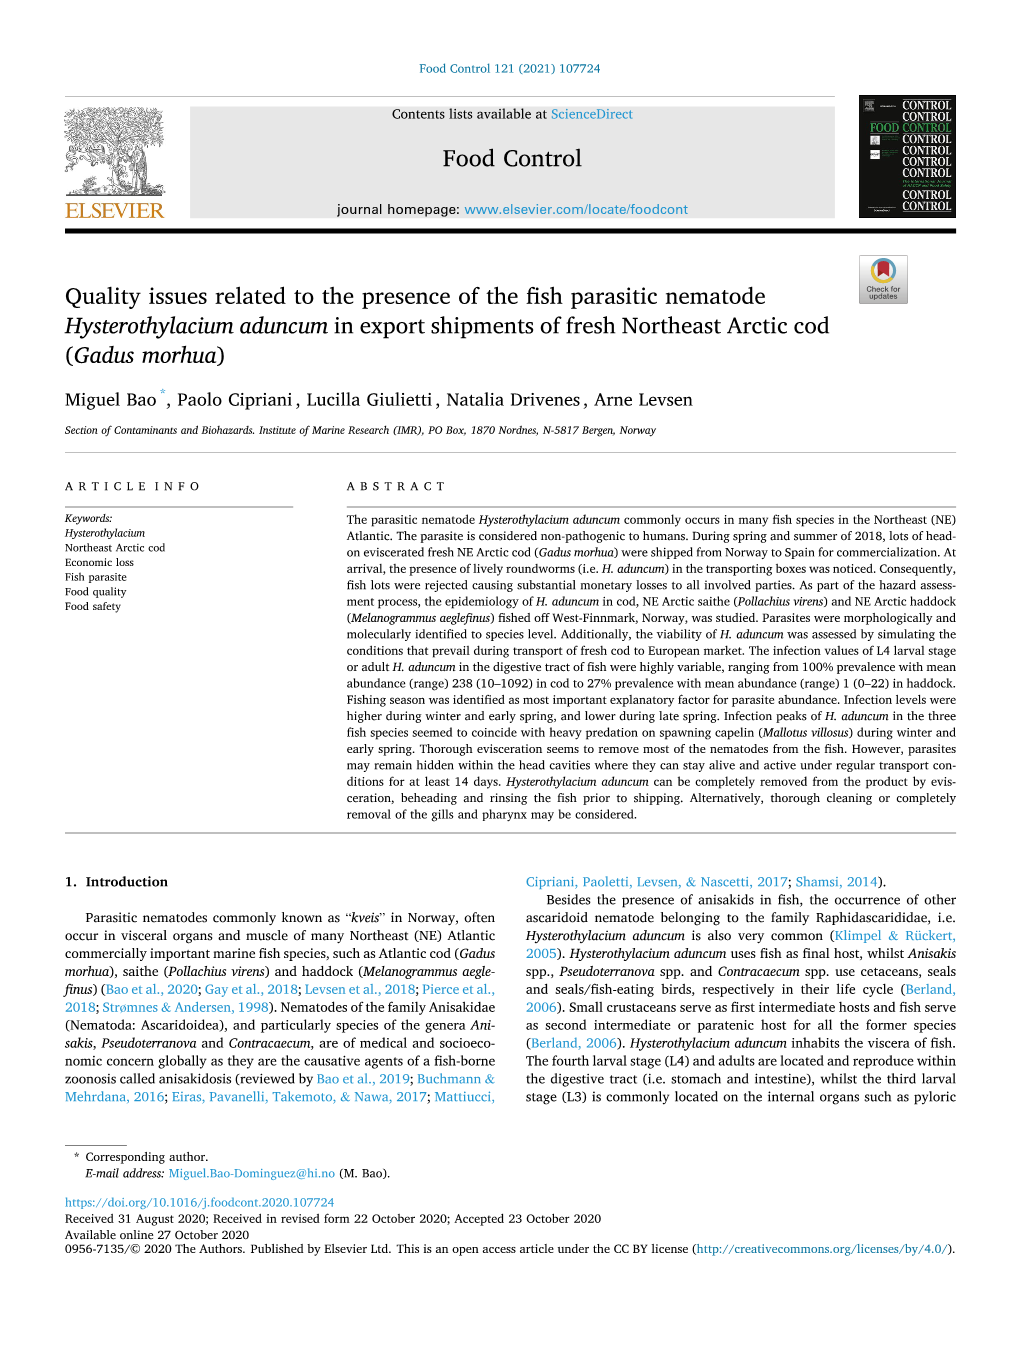 Quality Issues Related to the Presence of the Fish Parasitic Nematode Hysterothylacium Aduncum in Export Shipments of Fresh Northeast Arctic Cod (Gadus Morhua)